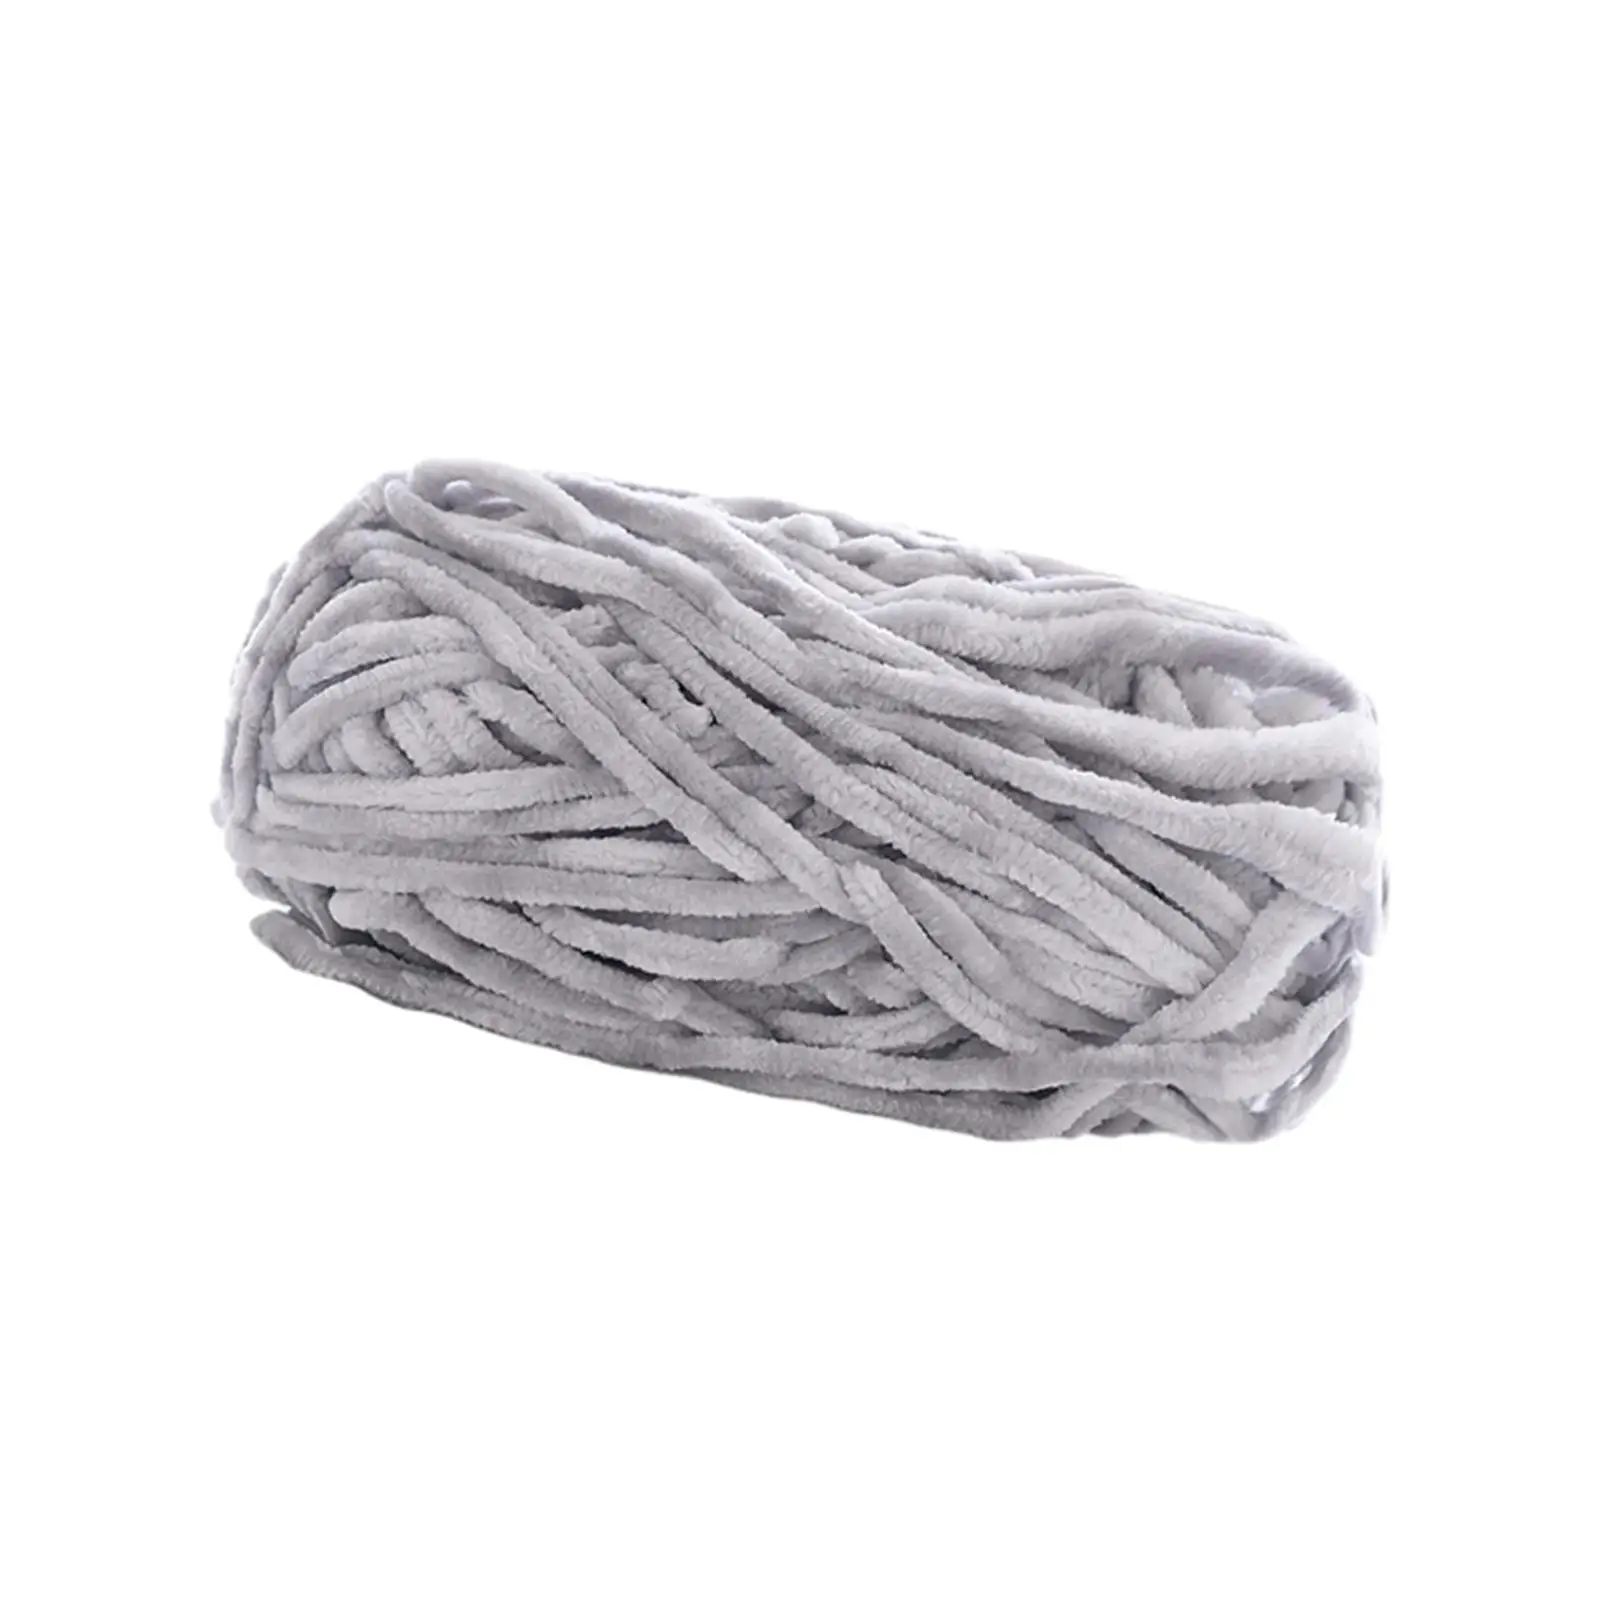 Chunky Wool Yarn Arm Knitting Yarn 80M Knitting for Tapestry Pet Bed Sweater